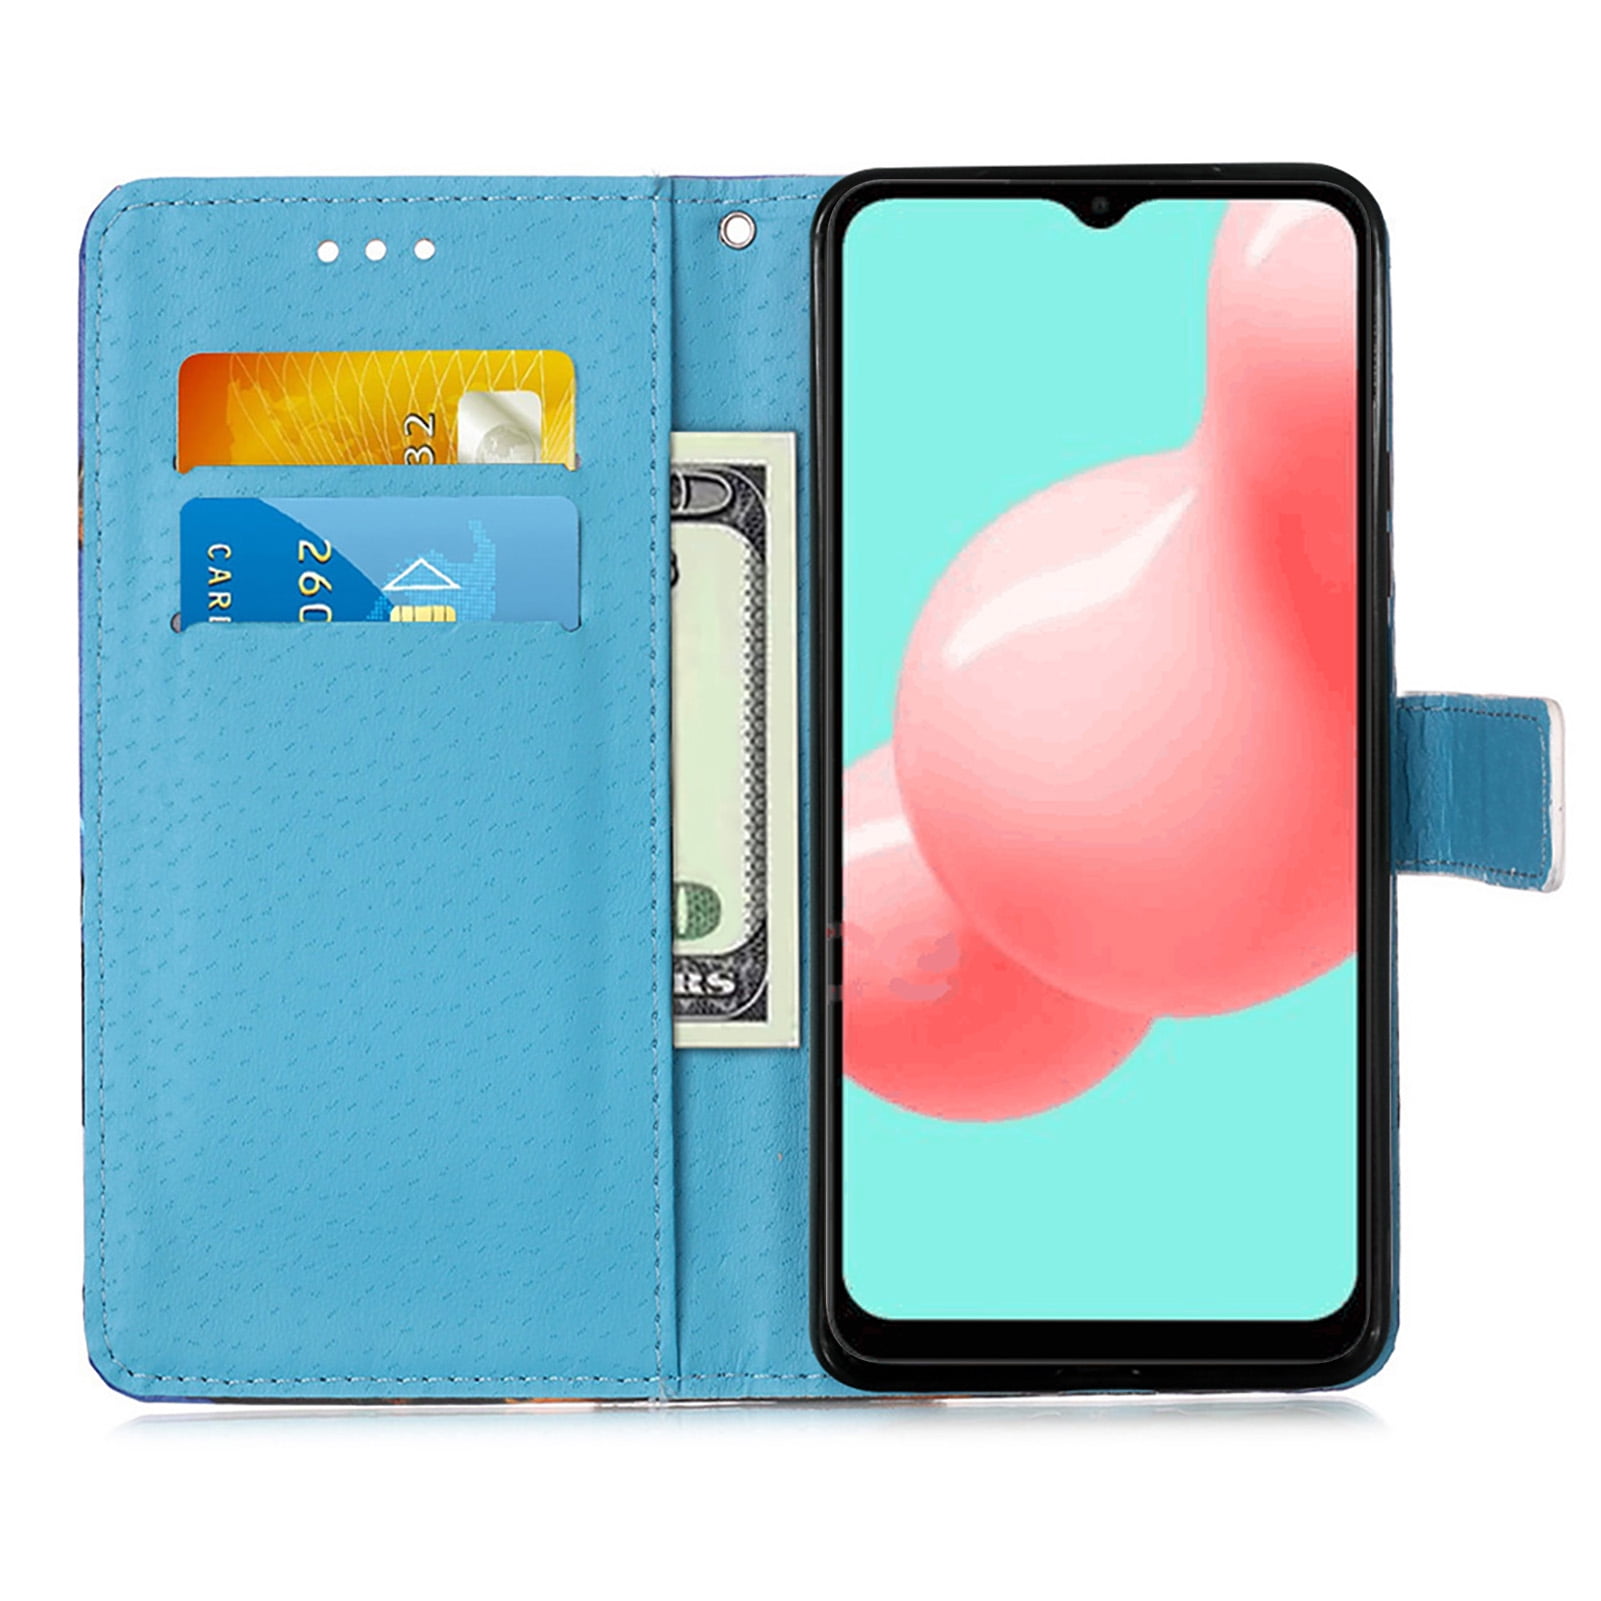 Phone Case for Galaxy A32 5G,Folding Flip Leather Wallet Protective Cover  with Card Slots Kickstand Magnetic Closure Cute Girls Women Cover for